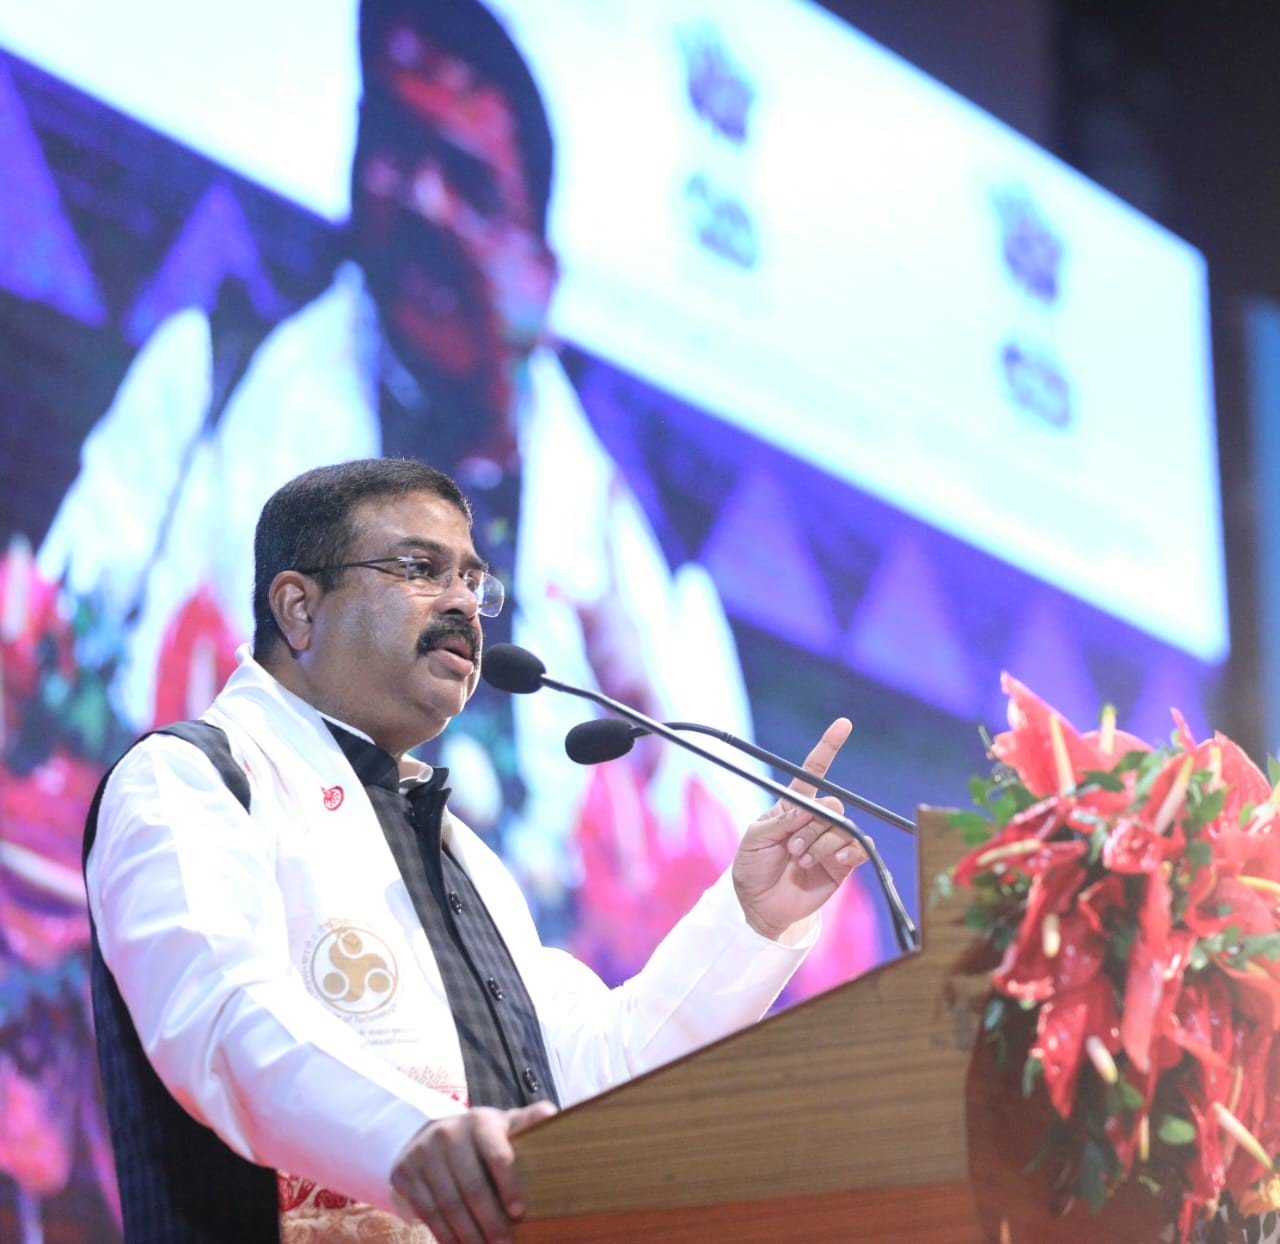 North Eastern region has immense potential to promote Research and Innovation - Shri Dharmendra Pradhan